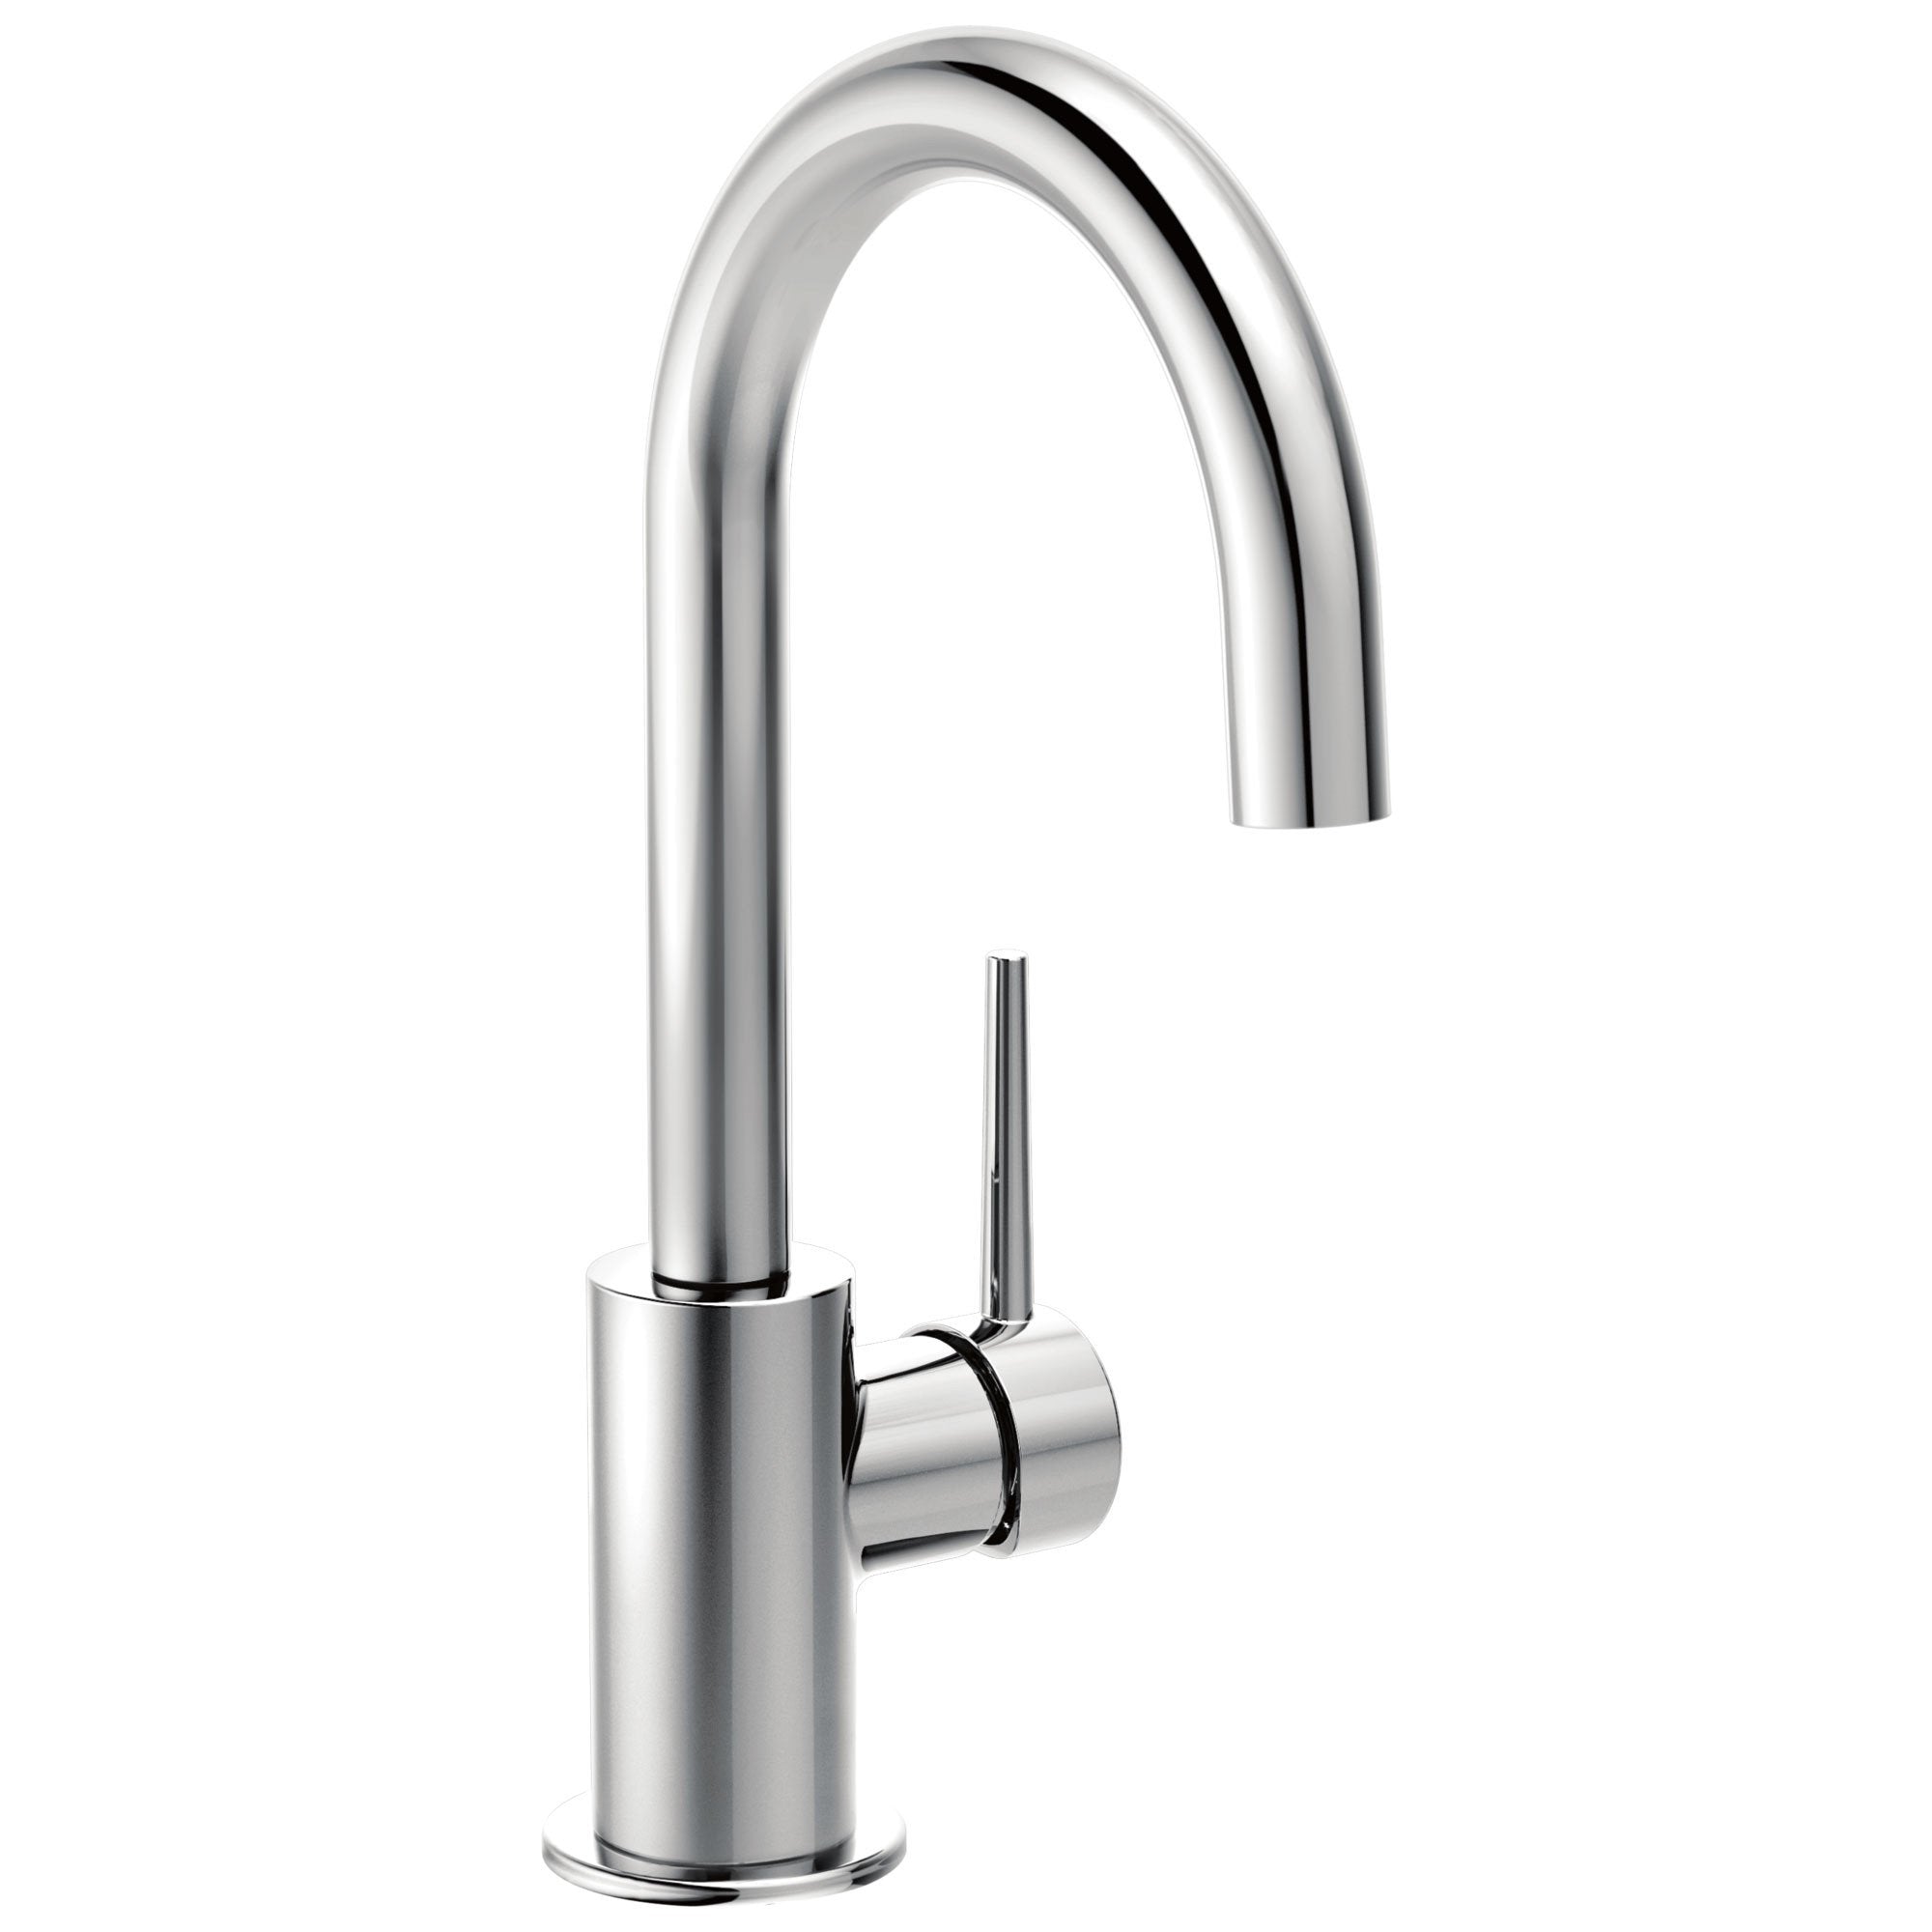 Delta Trinsic Collection Chrome Finish Single Lever Handle 360 Degree Swivel Spout Modern Bar Sink Faucet 729160